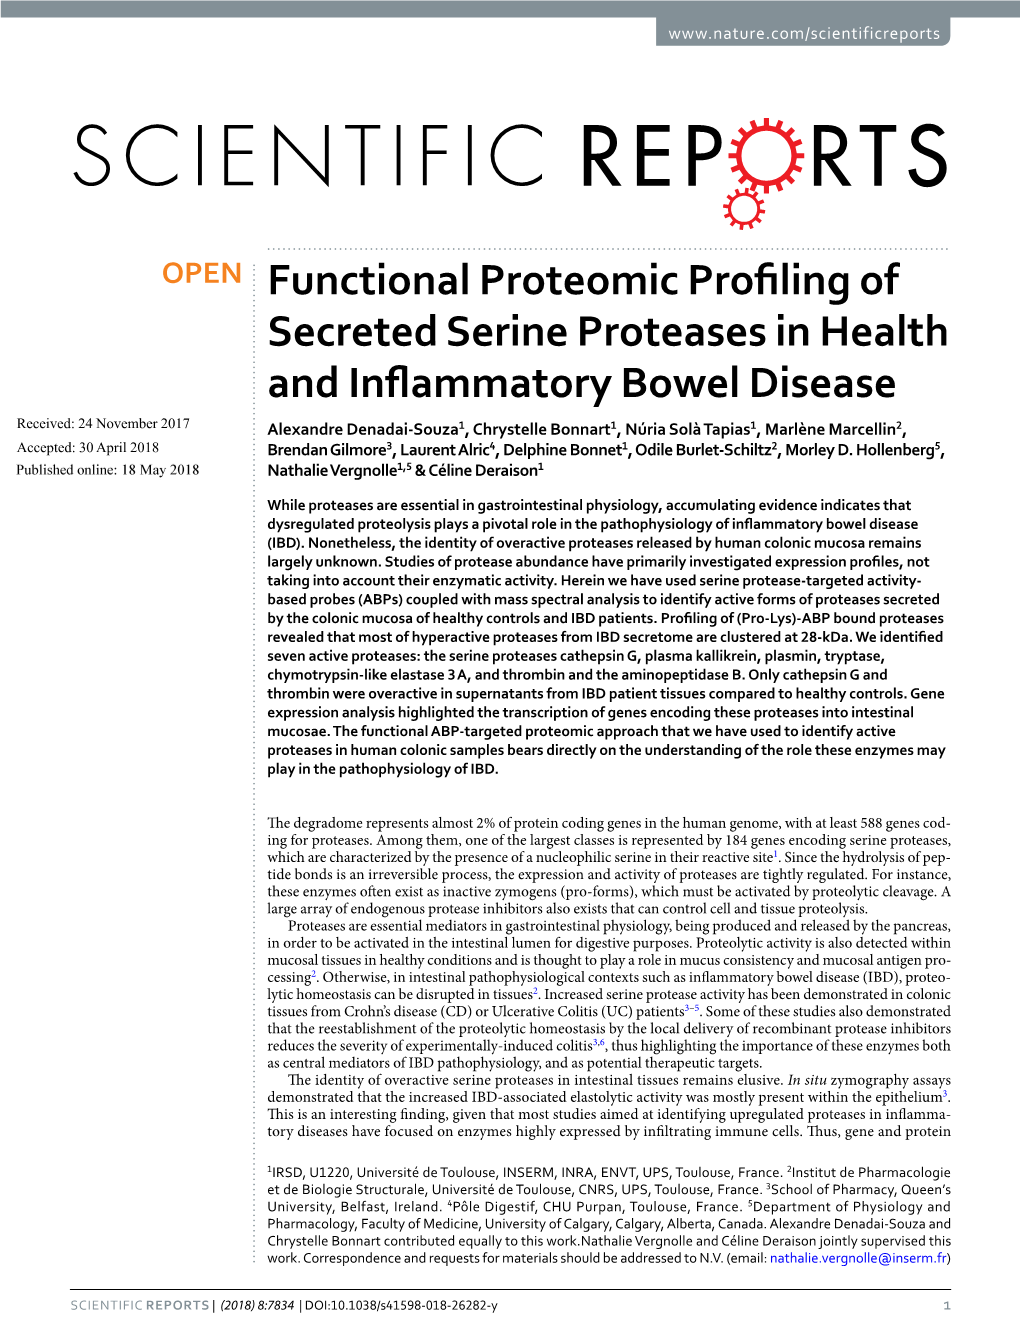 Functional Proteomic Profiling of Secreted Serine Proteases In